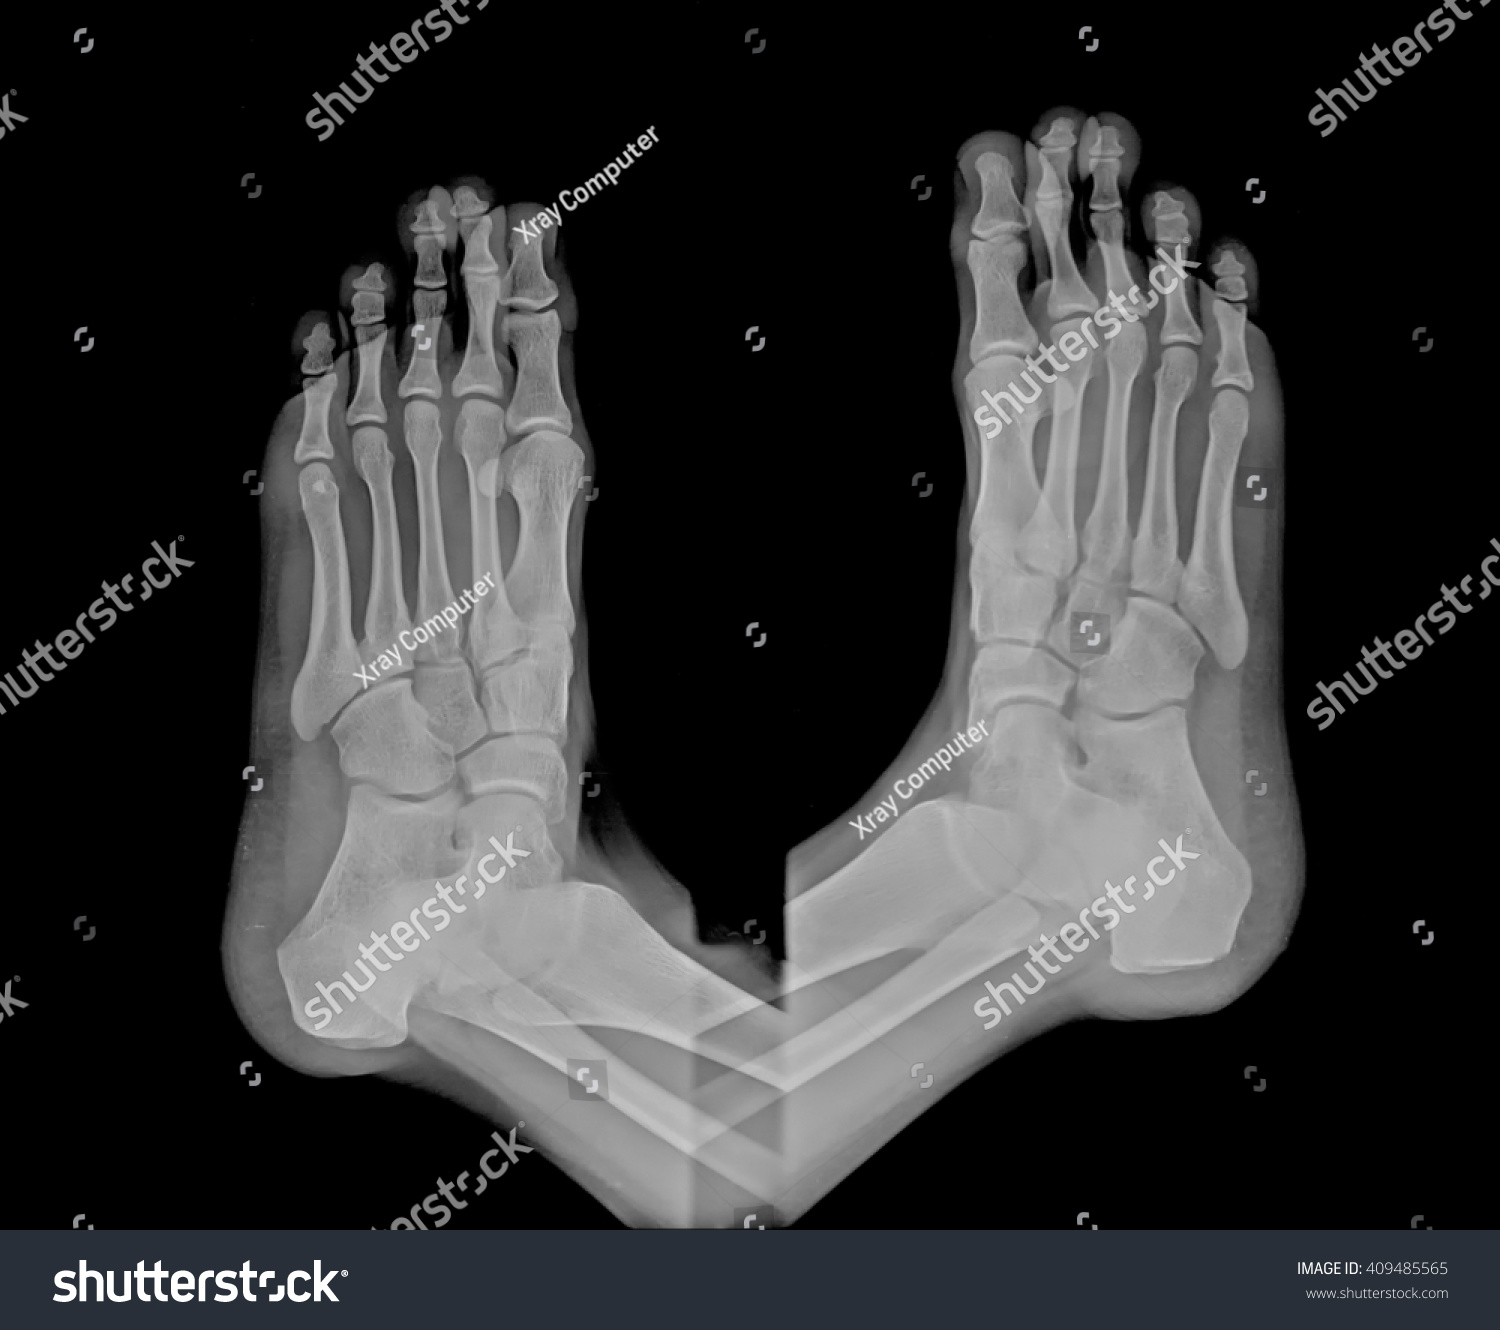 Human Right Left Foot Ankle Xray Stock Photo 409485565 | Shutterstock